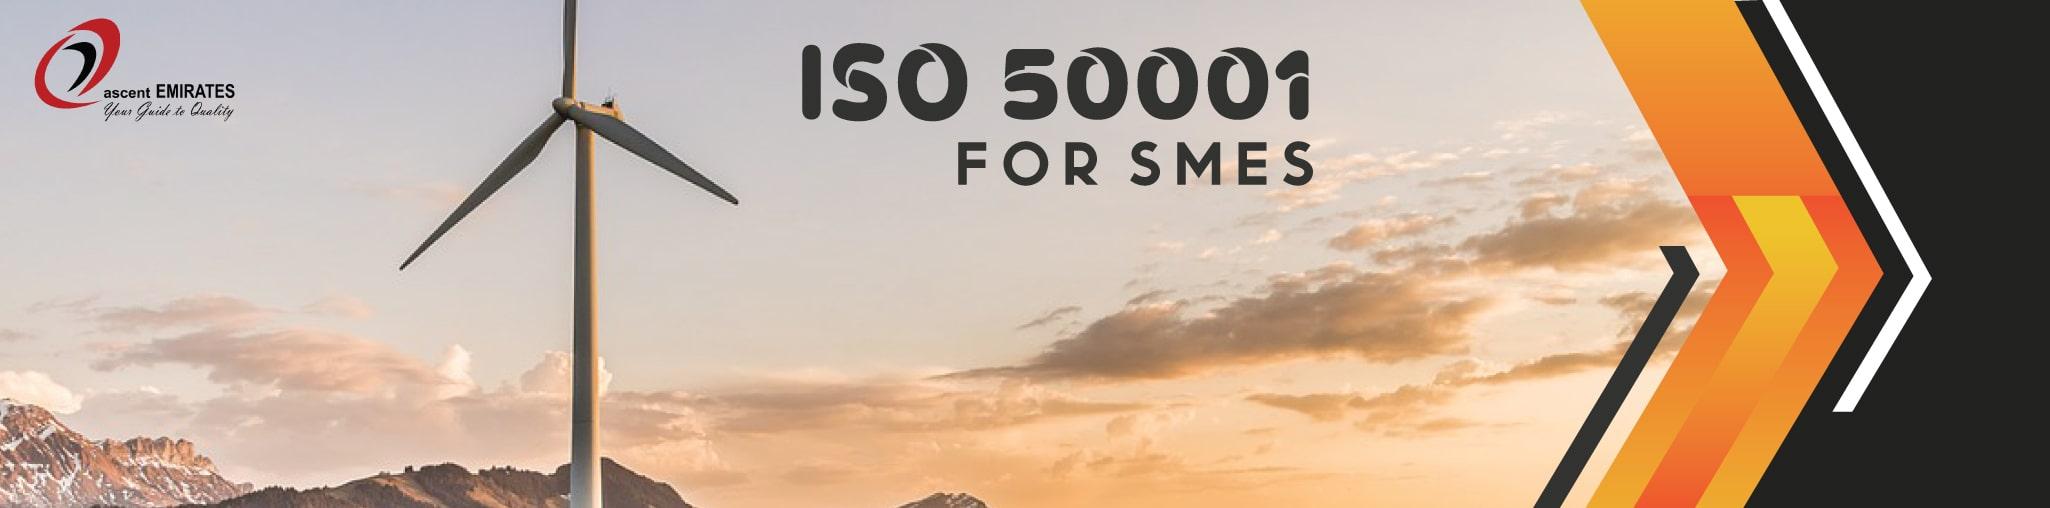 ISO 50001 For SMEs